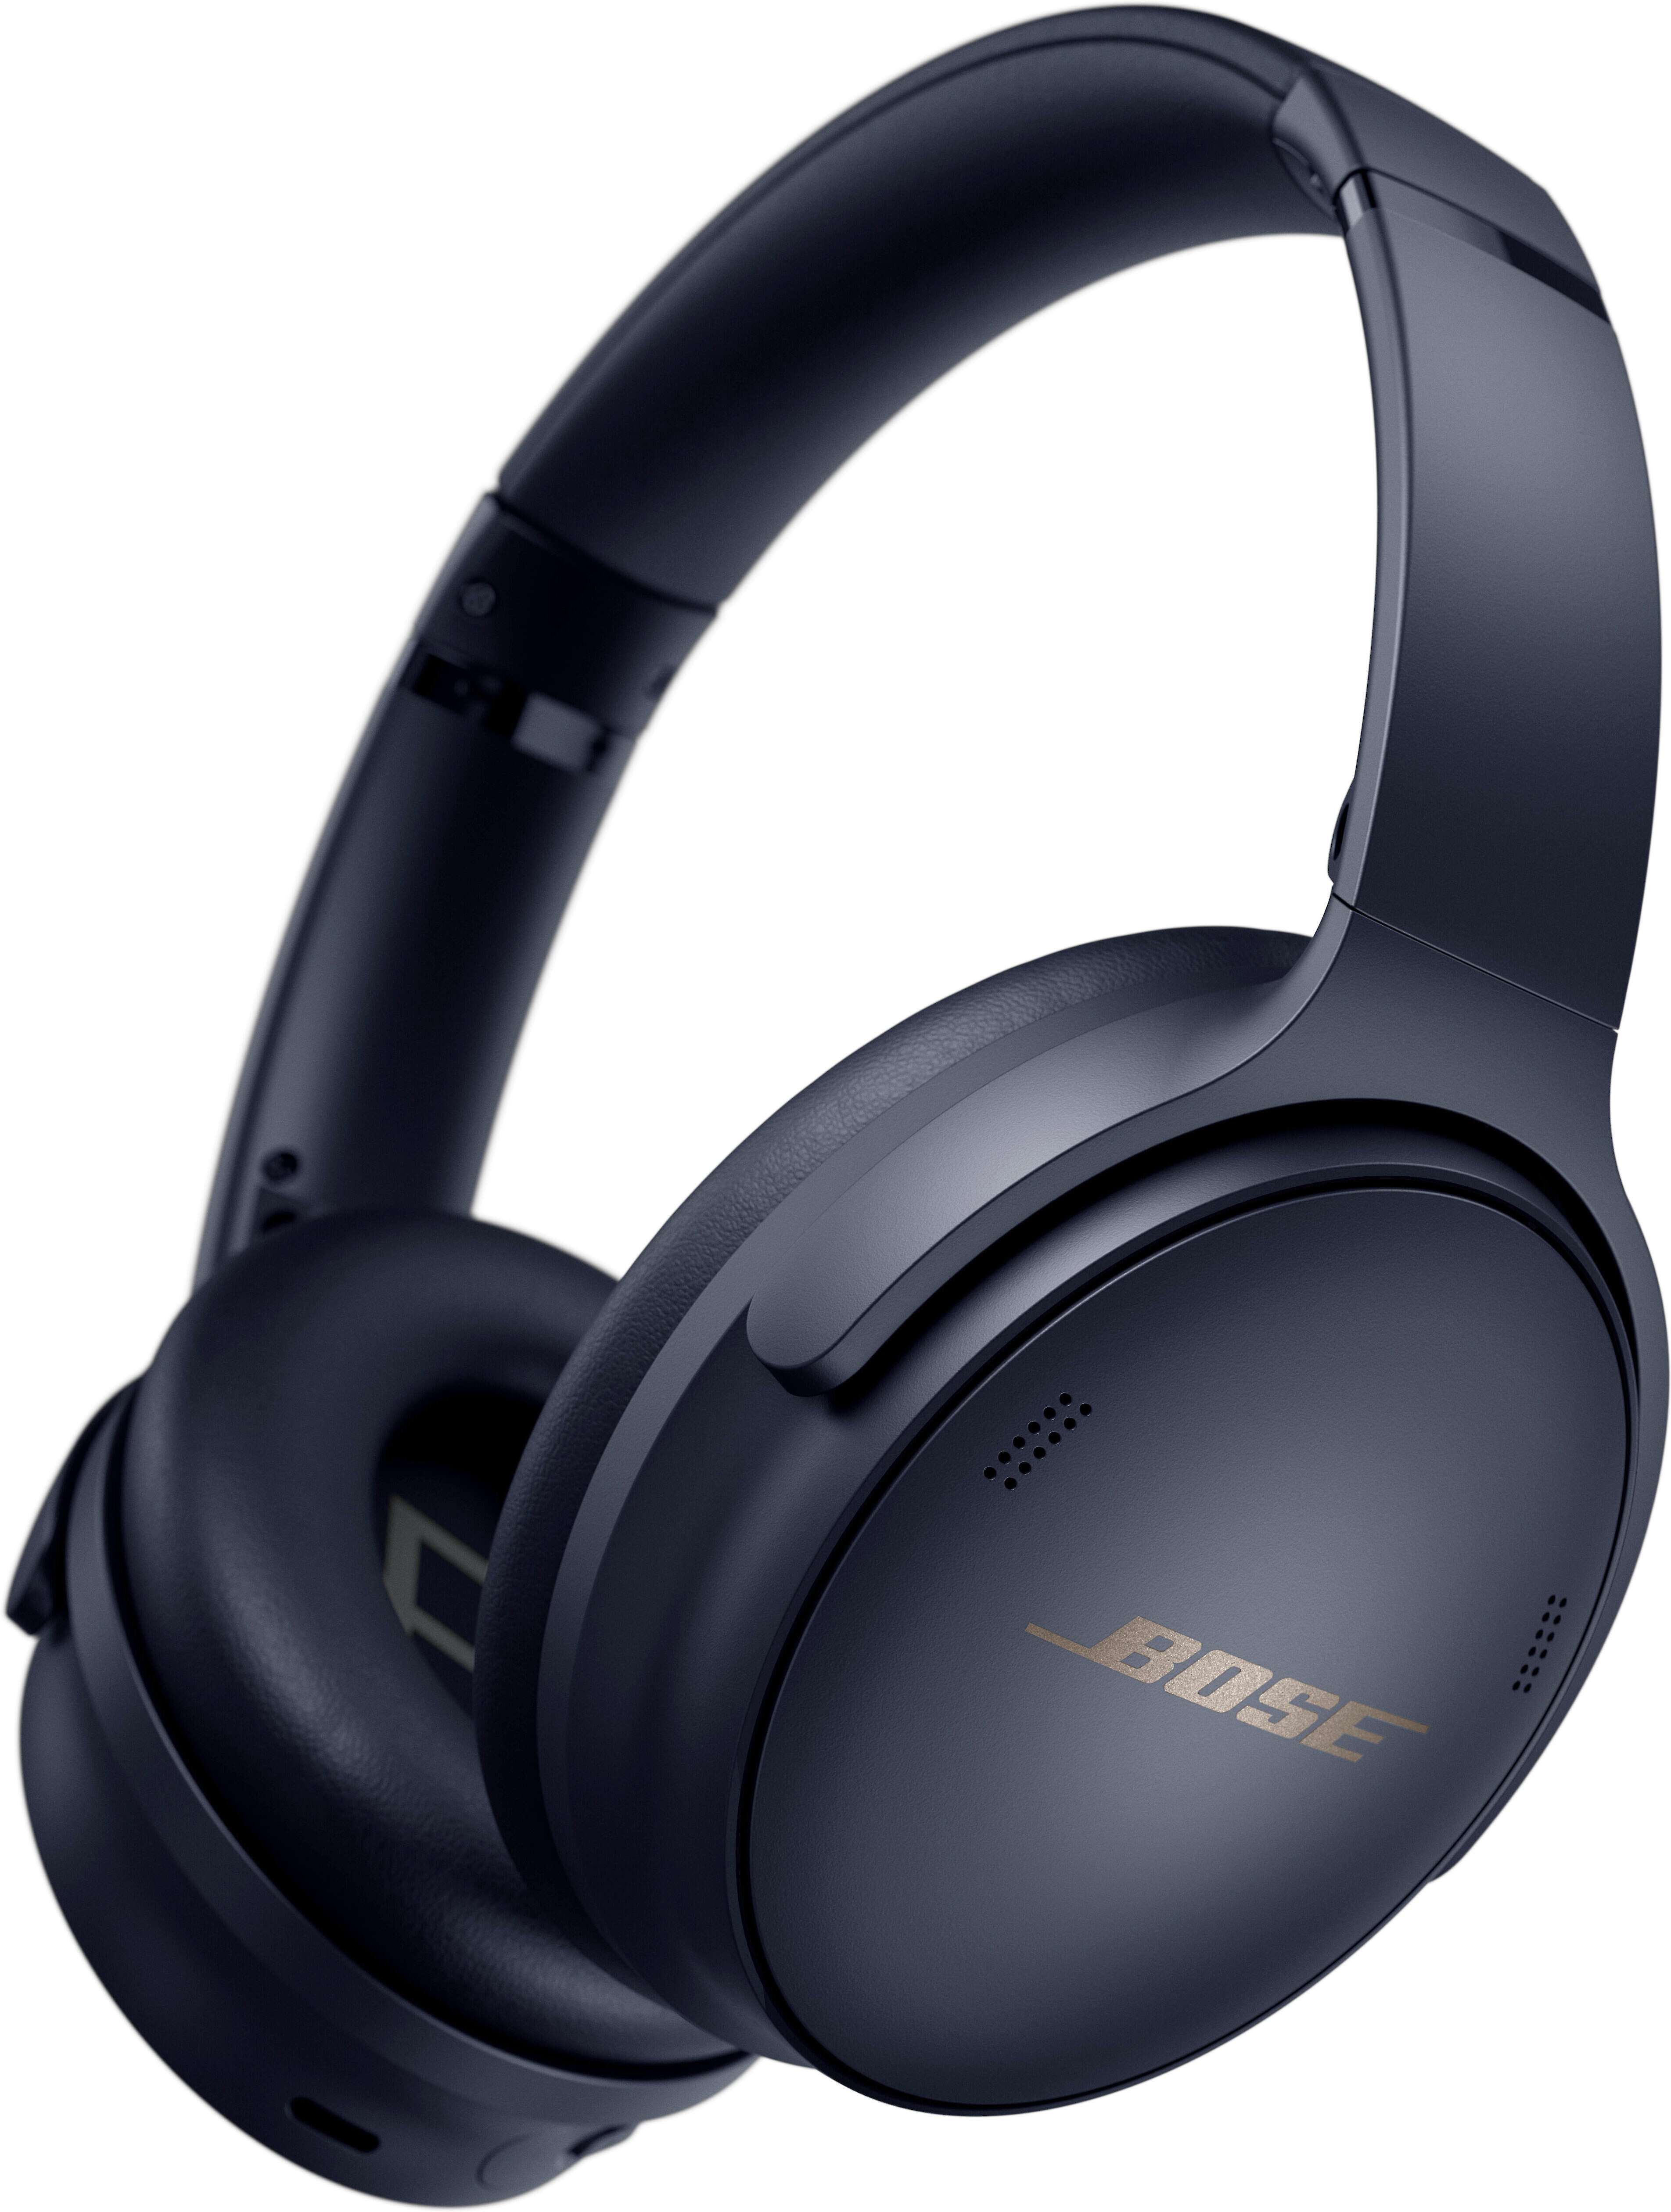 Customer Reviews: Bose® QuietComfort® 45 Limited (Midnight Blue) Over-ear Bluetooth® wireless noise-cancelling headphones at Crutchfield